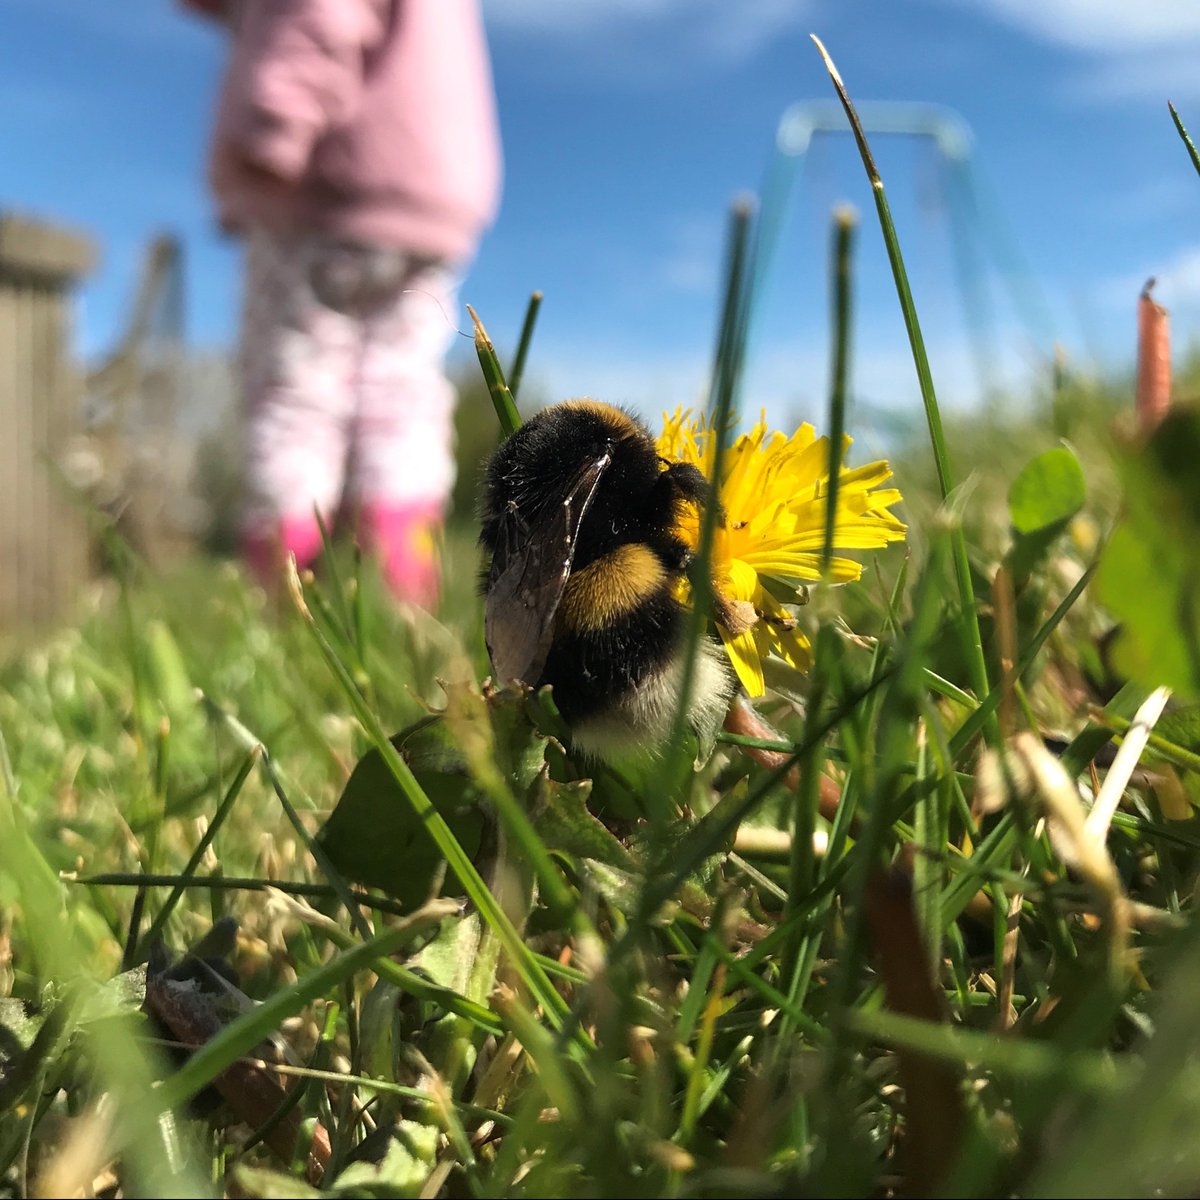 A great way to #MakeSpaceForNature is to let it grow for #NoMowMay and help your local wildlife 🌱. Leaving patches of grassy areas allows flowers to bloom and provides food and shelter for insects, birds and small mammals @Love_plants 🐝 More here: orlo.uk/TW1SW